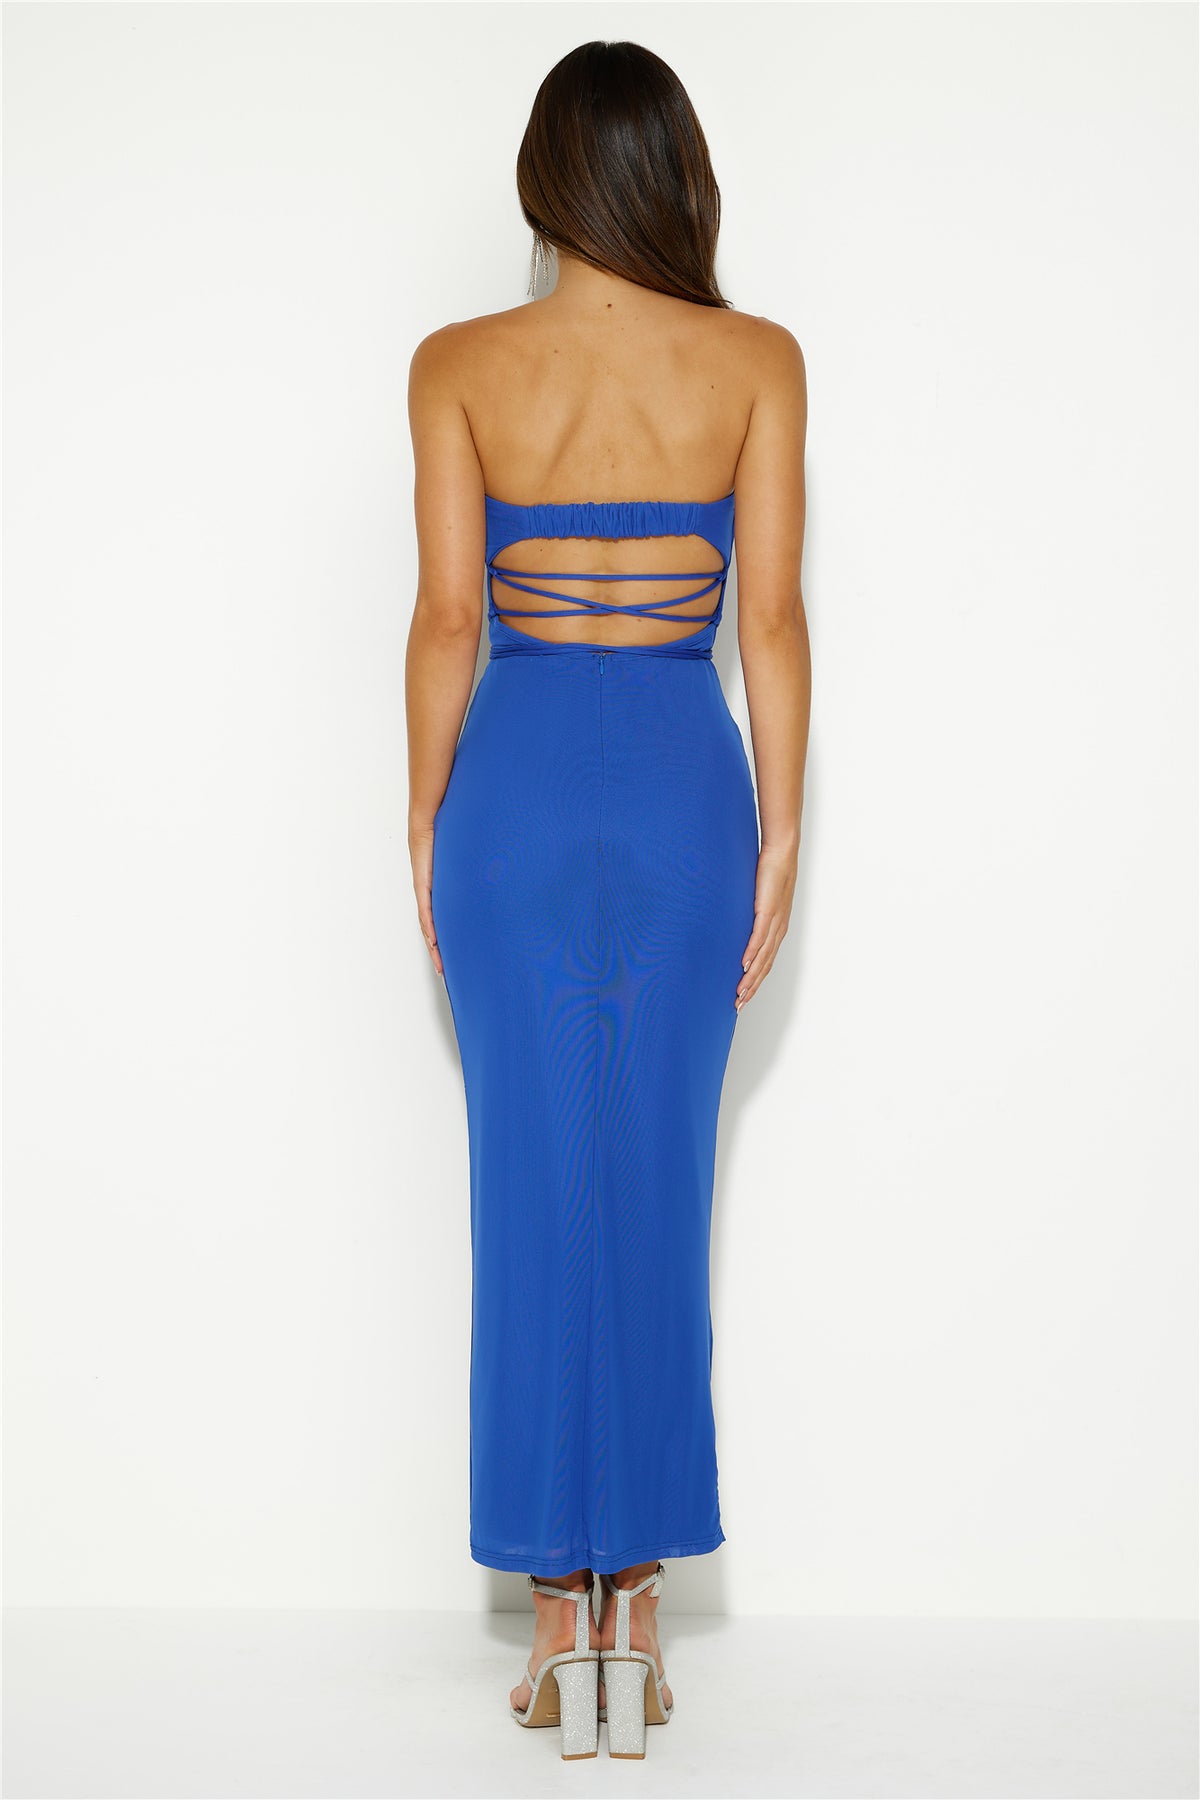 Shop Formal Dress - Look In The Mirror Mesh Midi Dress Blue fourth image